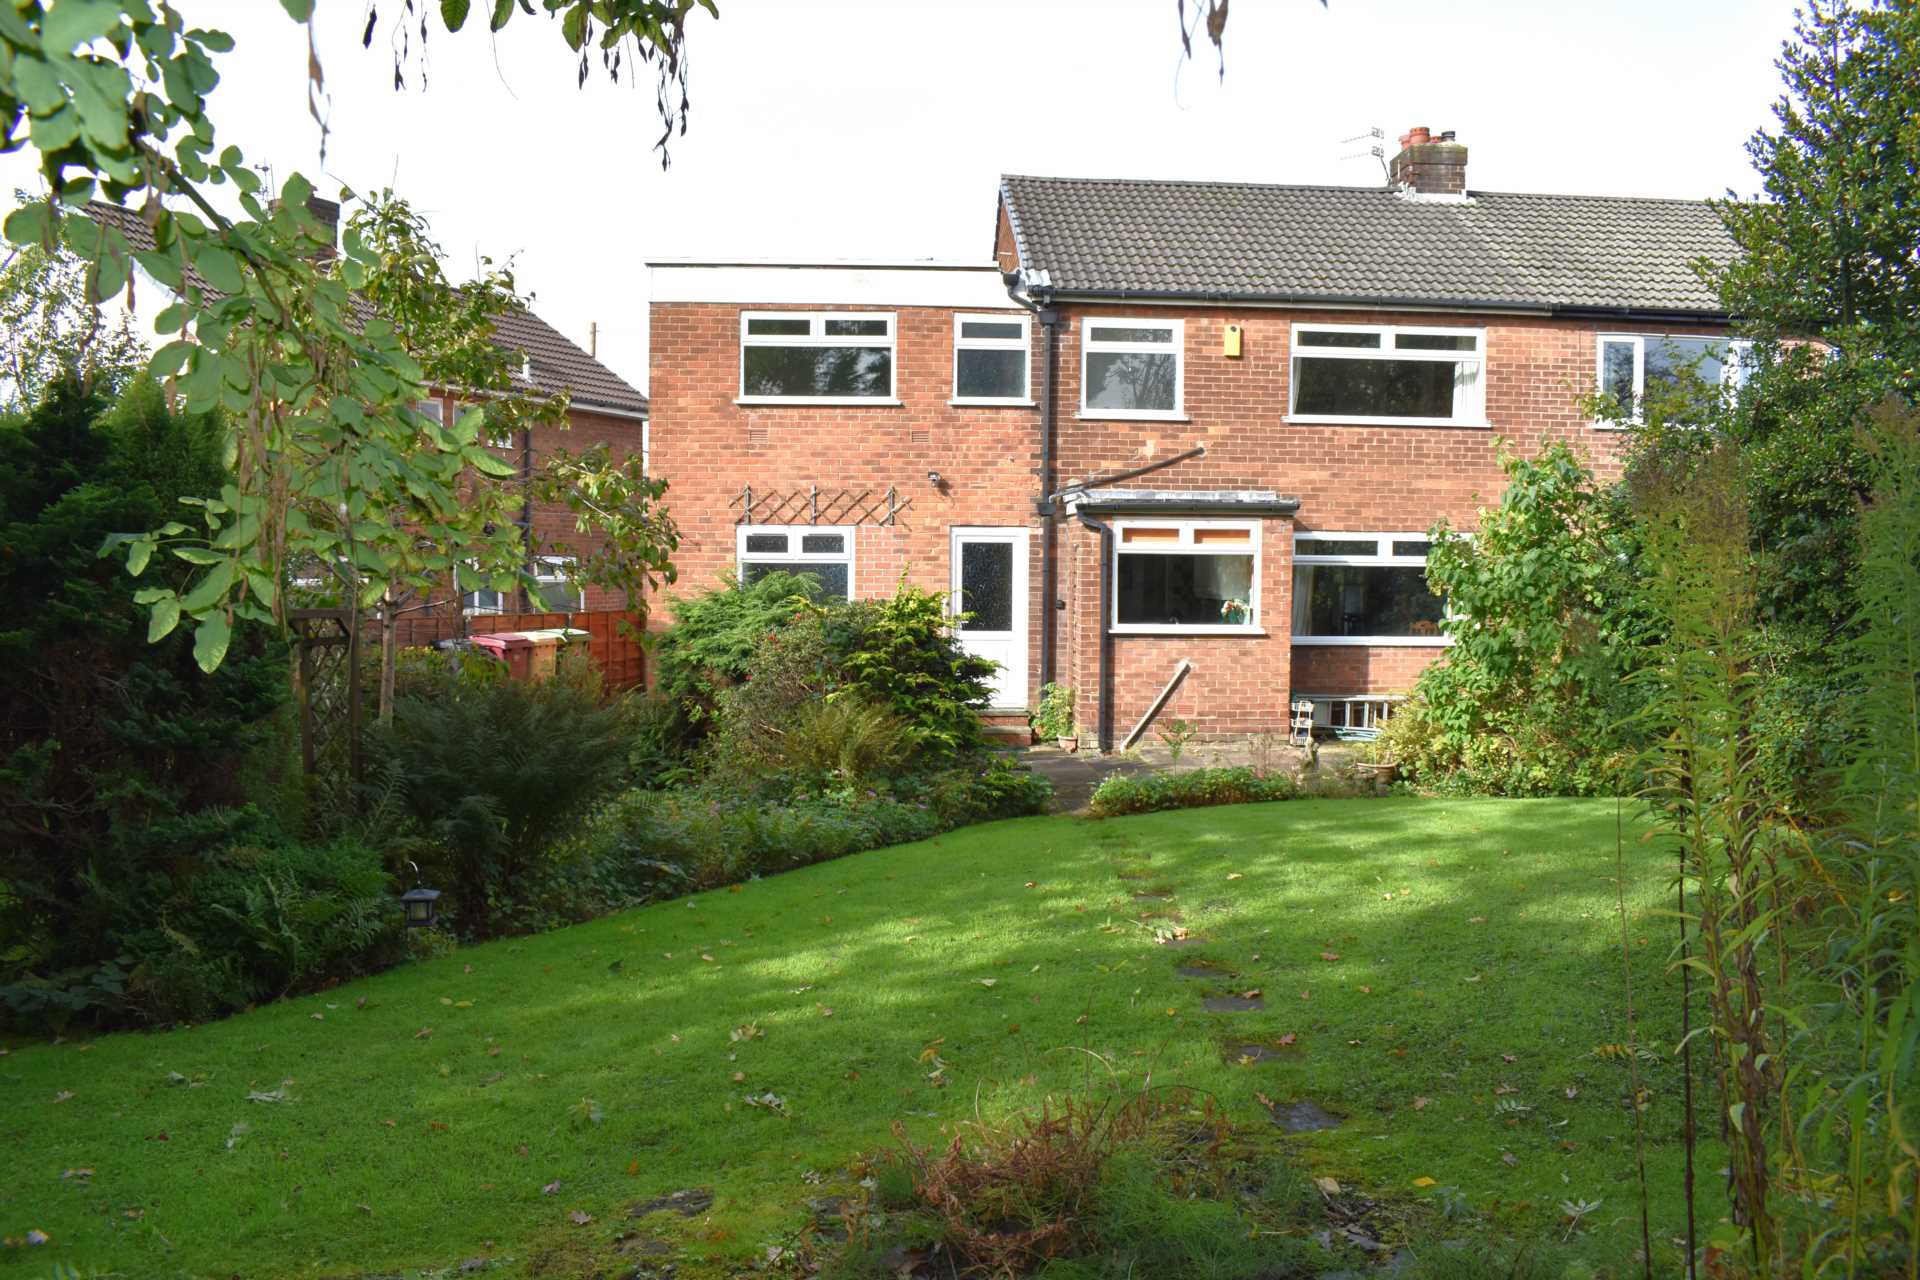 (4 or 5 bedrooms) - Lea Gate Close, Harwood, Image 31